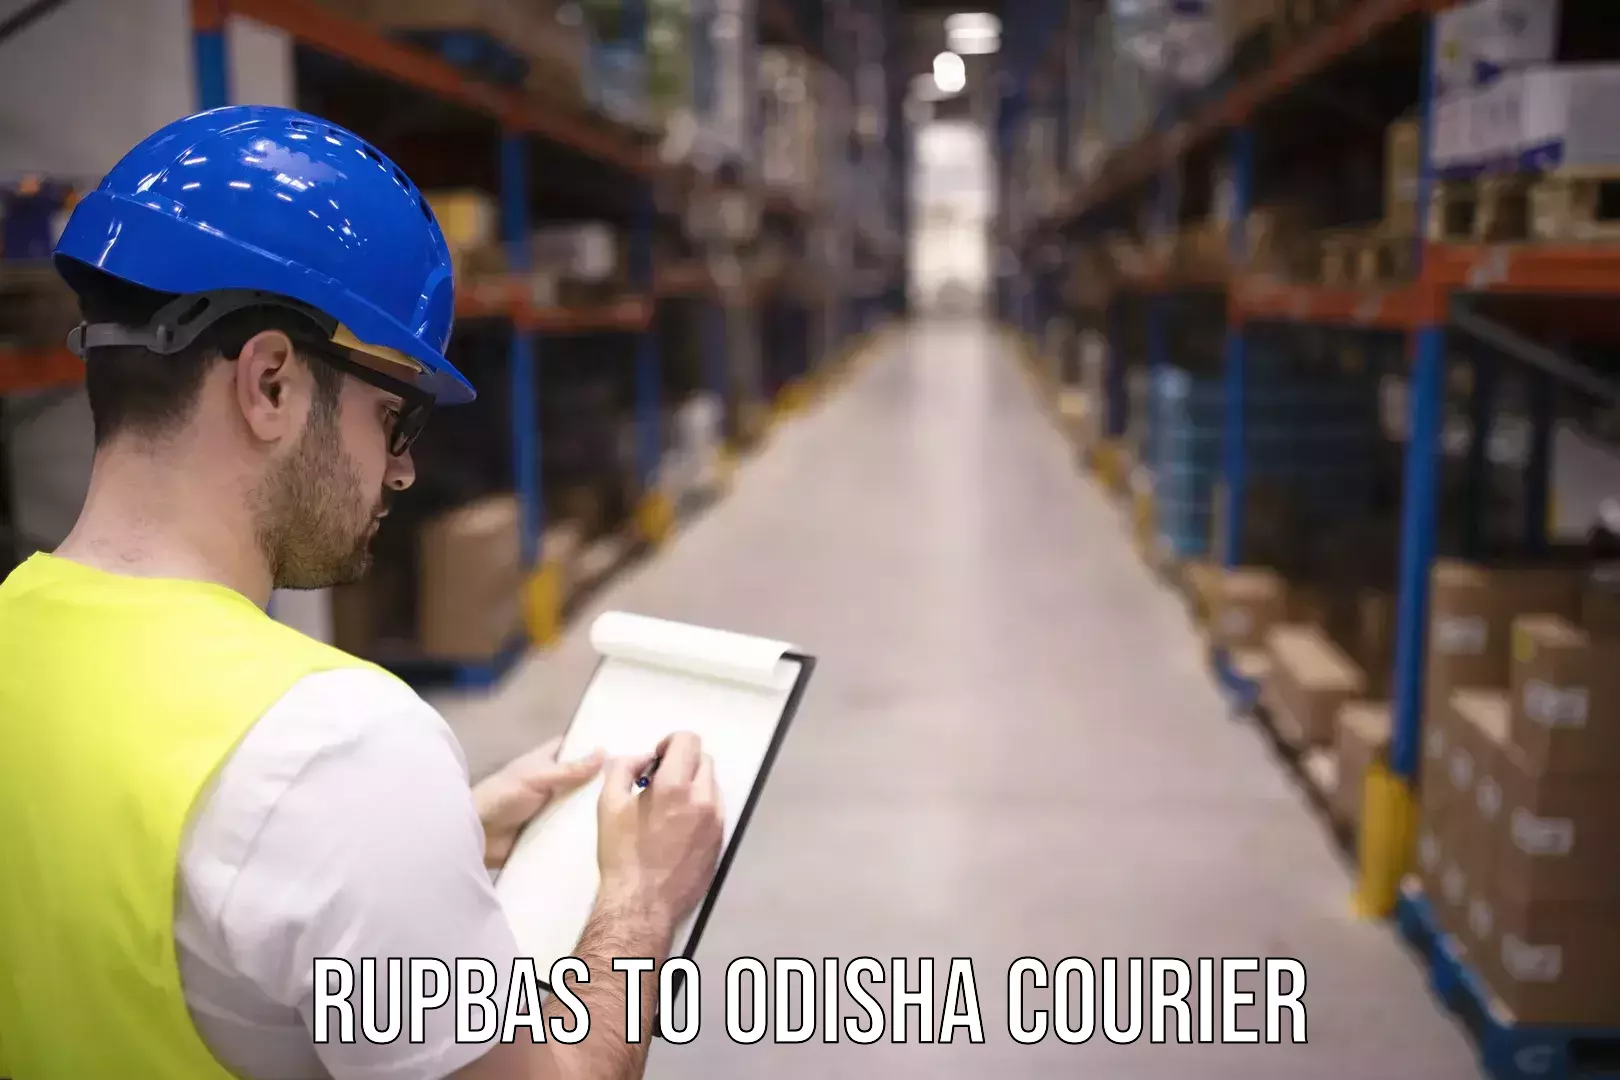 Courier service efficiency Rupbas to Odisha